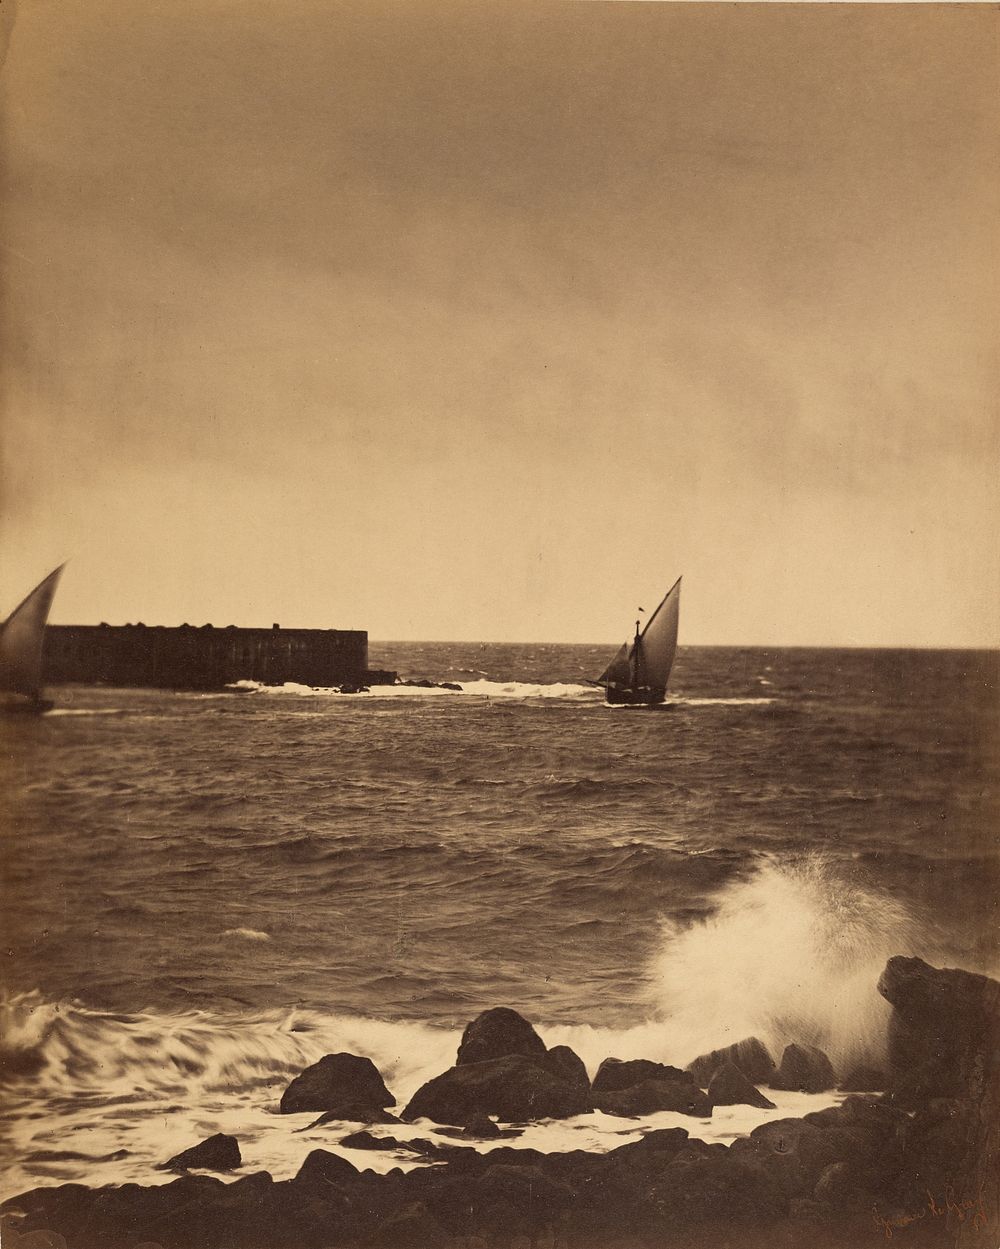 The Breaking Wave by Gustave Le Gray